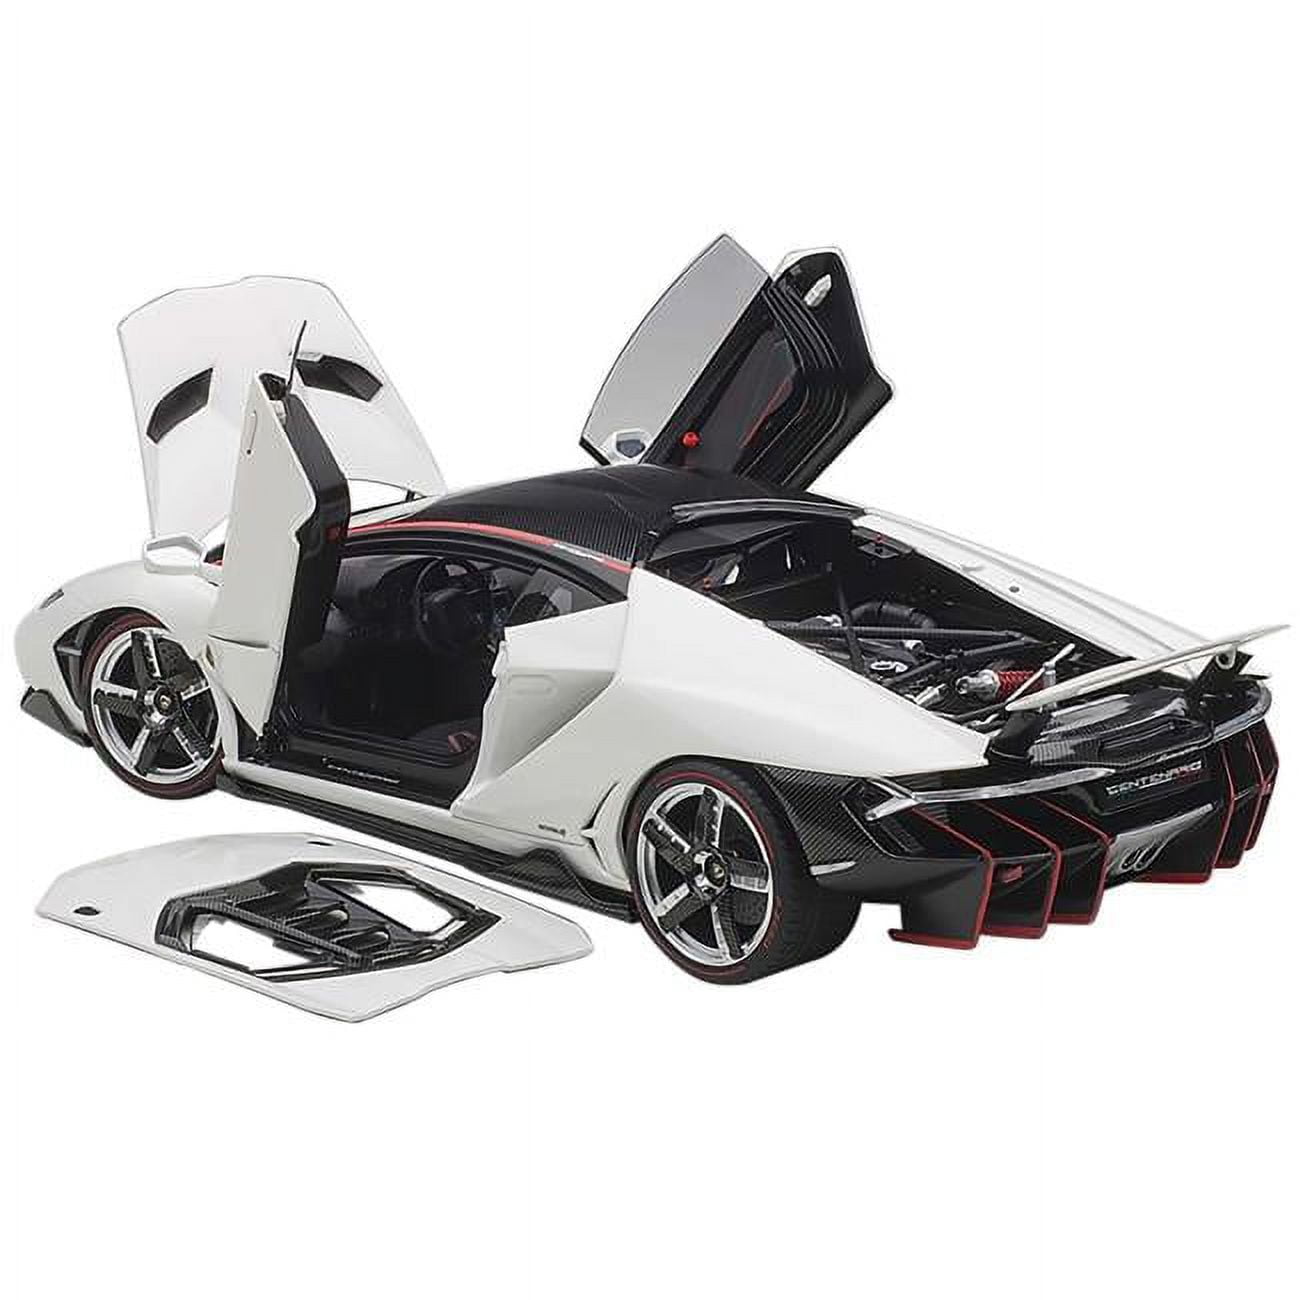 Picture of Autoart 79111 Lamborghini Centenario Bianci Isis & Solid White with Carbon Top 1 by 18 Scale Model Car